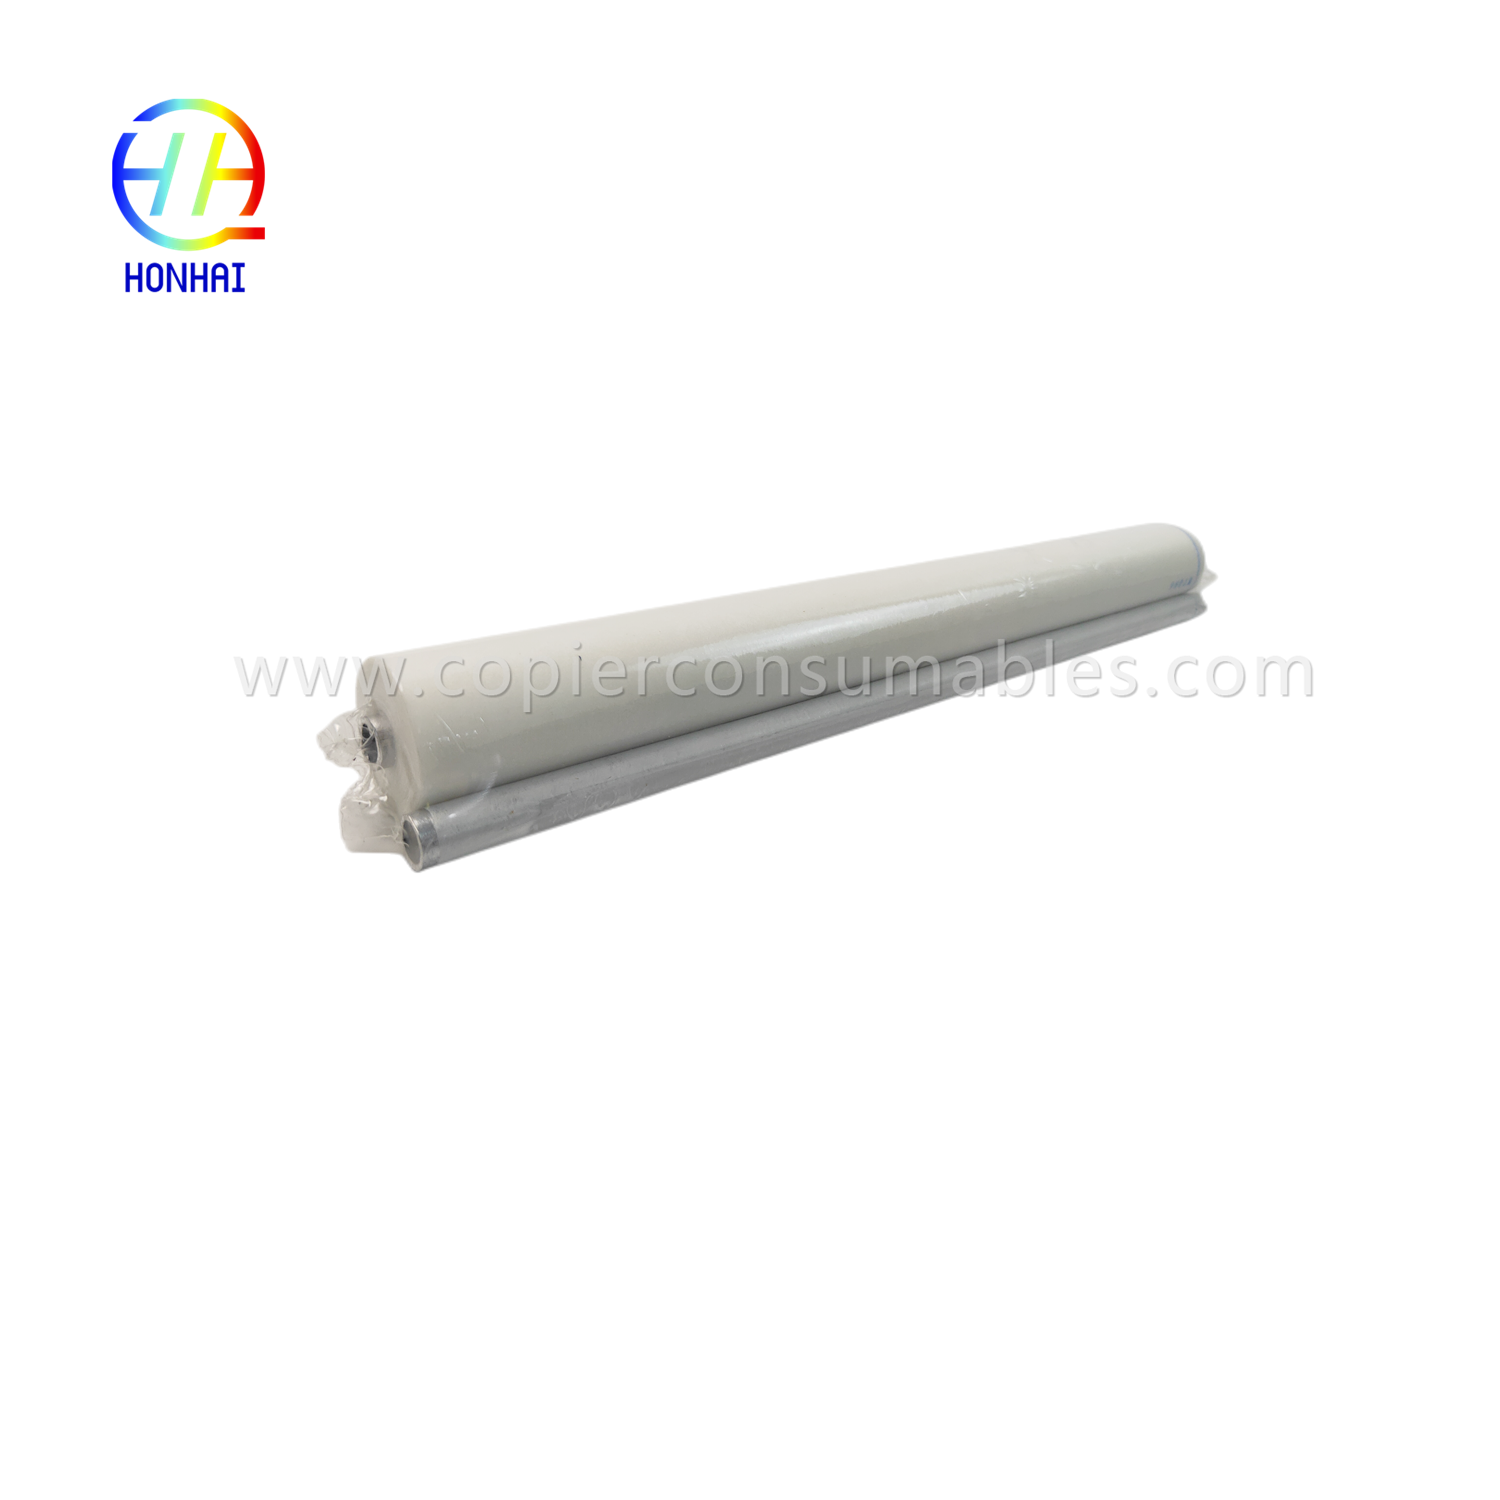 https://www.copierconsumables.com/fuser-cleaning-web-for-canon-ir6800-ir-8085-8095-8105-8205-8285-8295-fq-009-fc5-2286-000-oem-fuser- táirge glantacháin-fuser-roller/